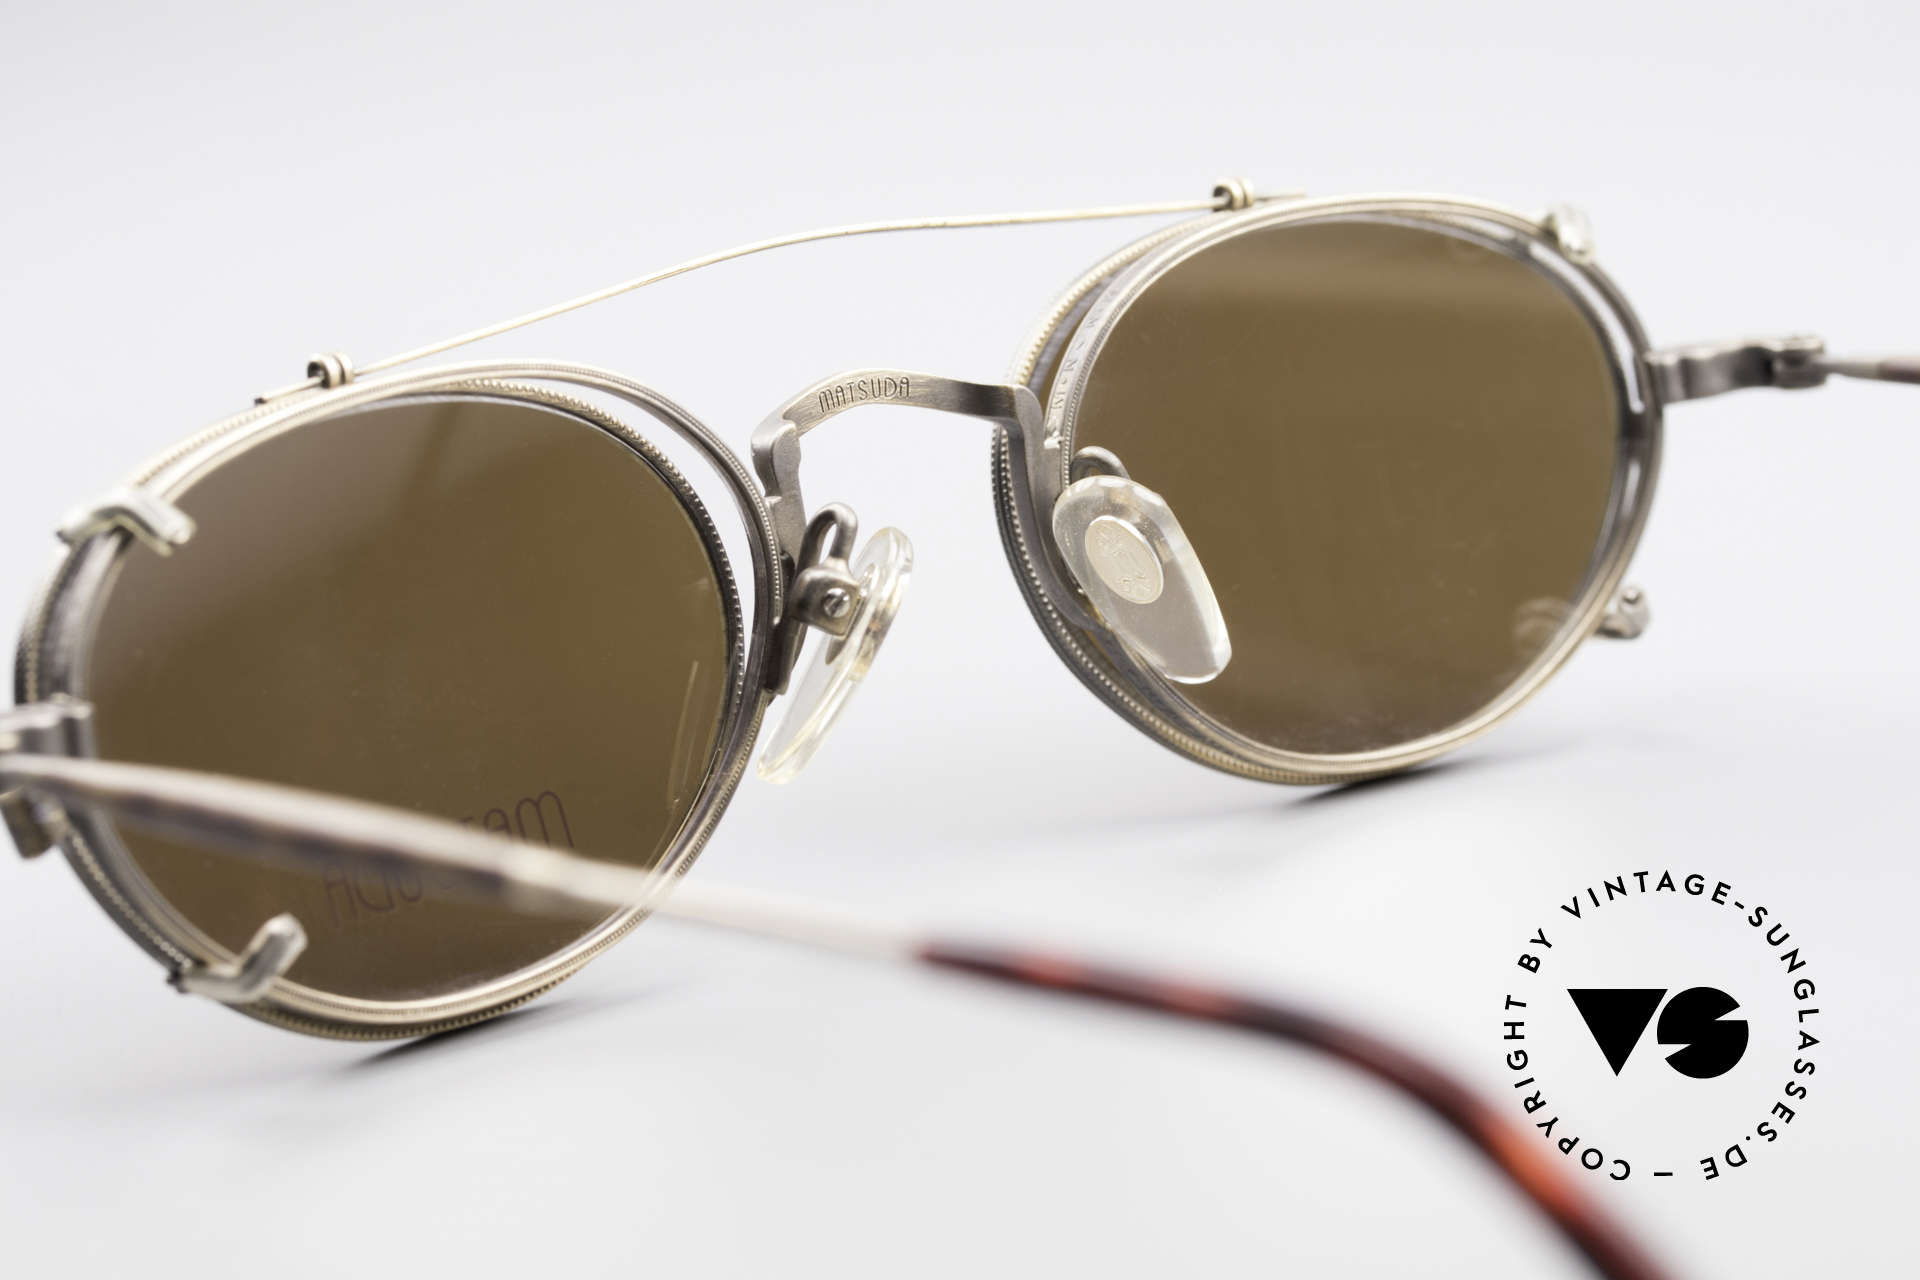 Matsuda 10102 Vintage Steampunk Shades, Size: small, Made for Men